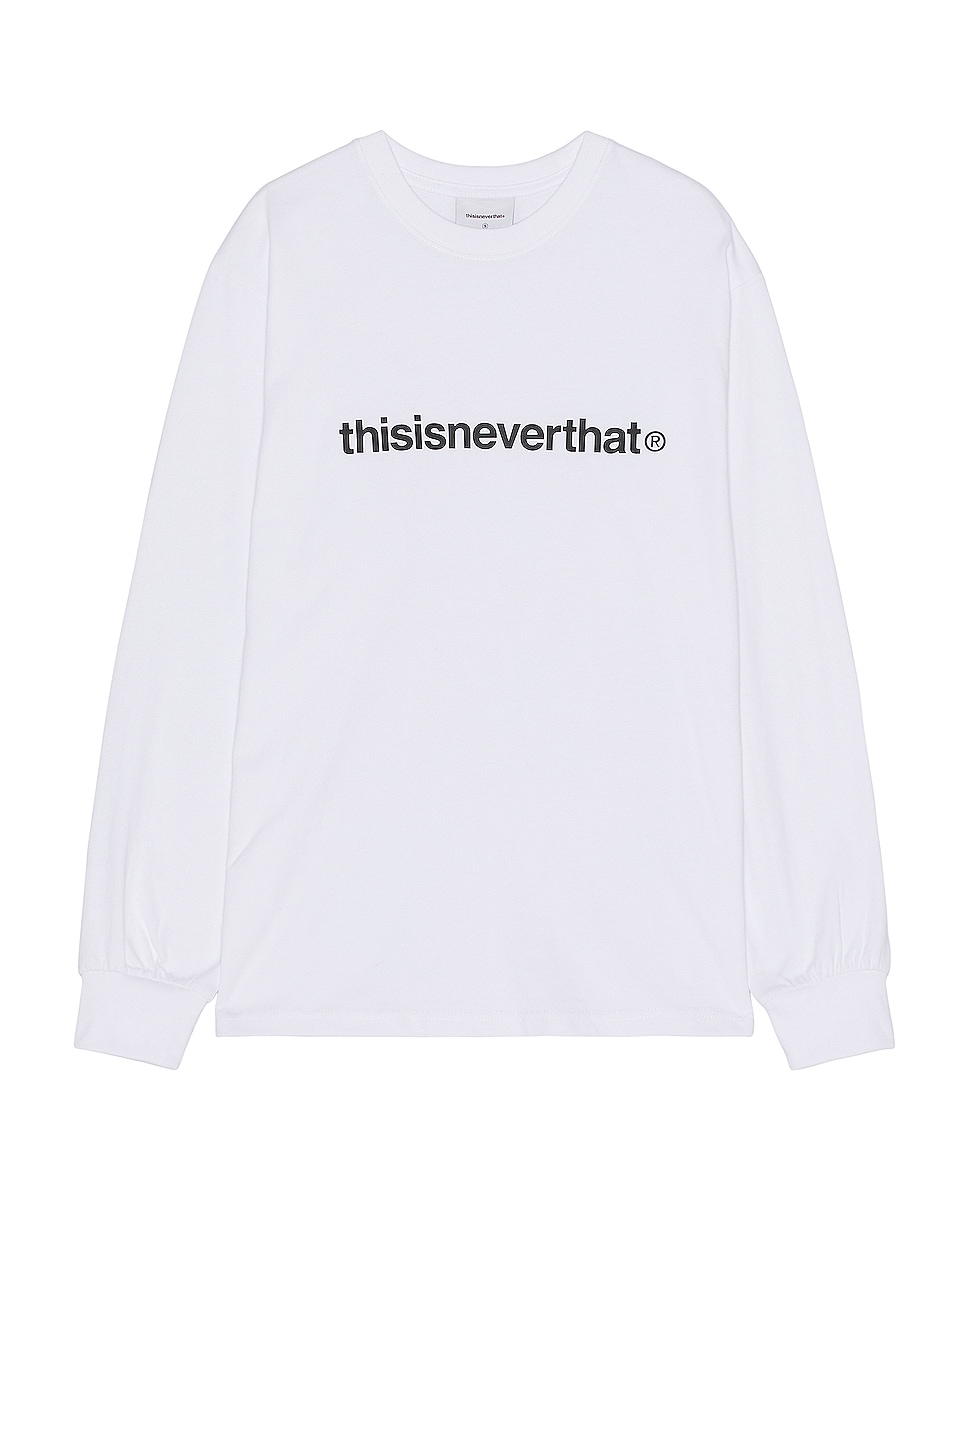 Image 1 of thisisneverthat T-logo Long Sleeve Tee in White